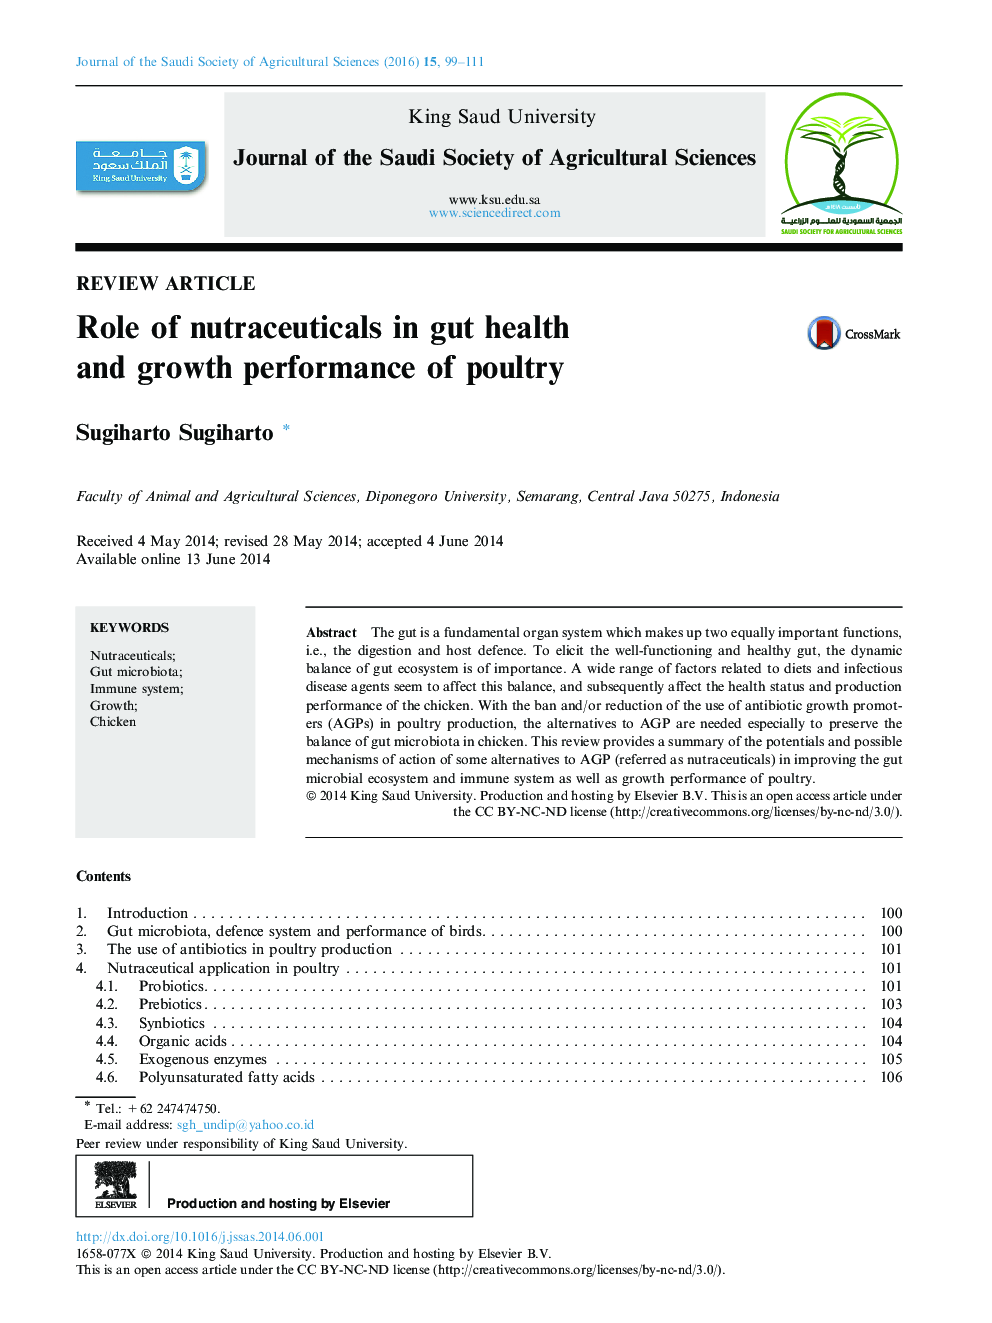 Role of nutraceuticals in gut health and growth performance of poultry 